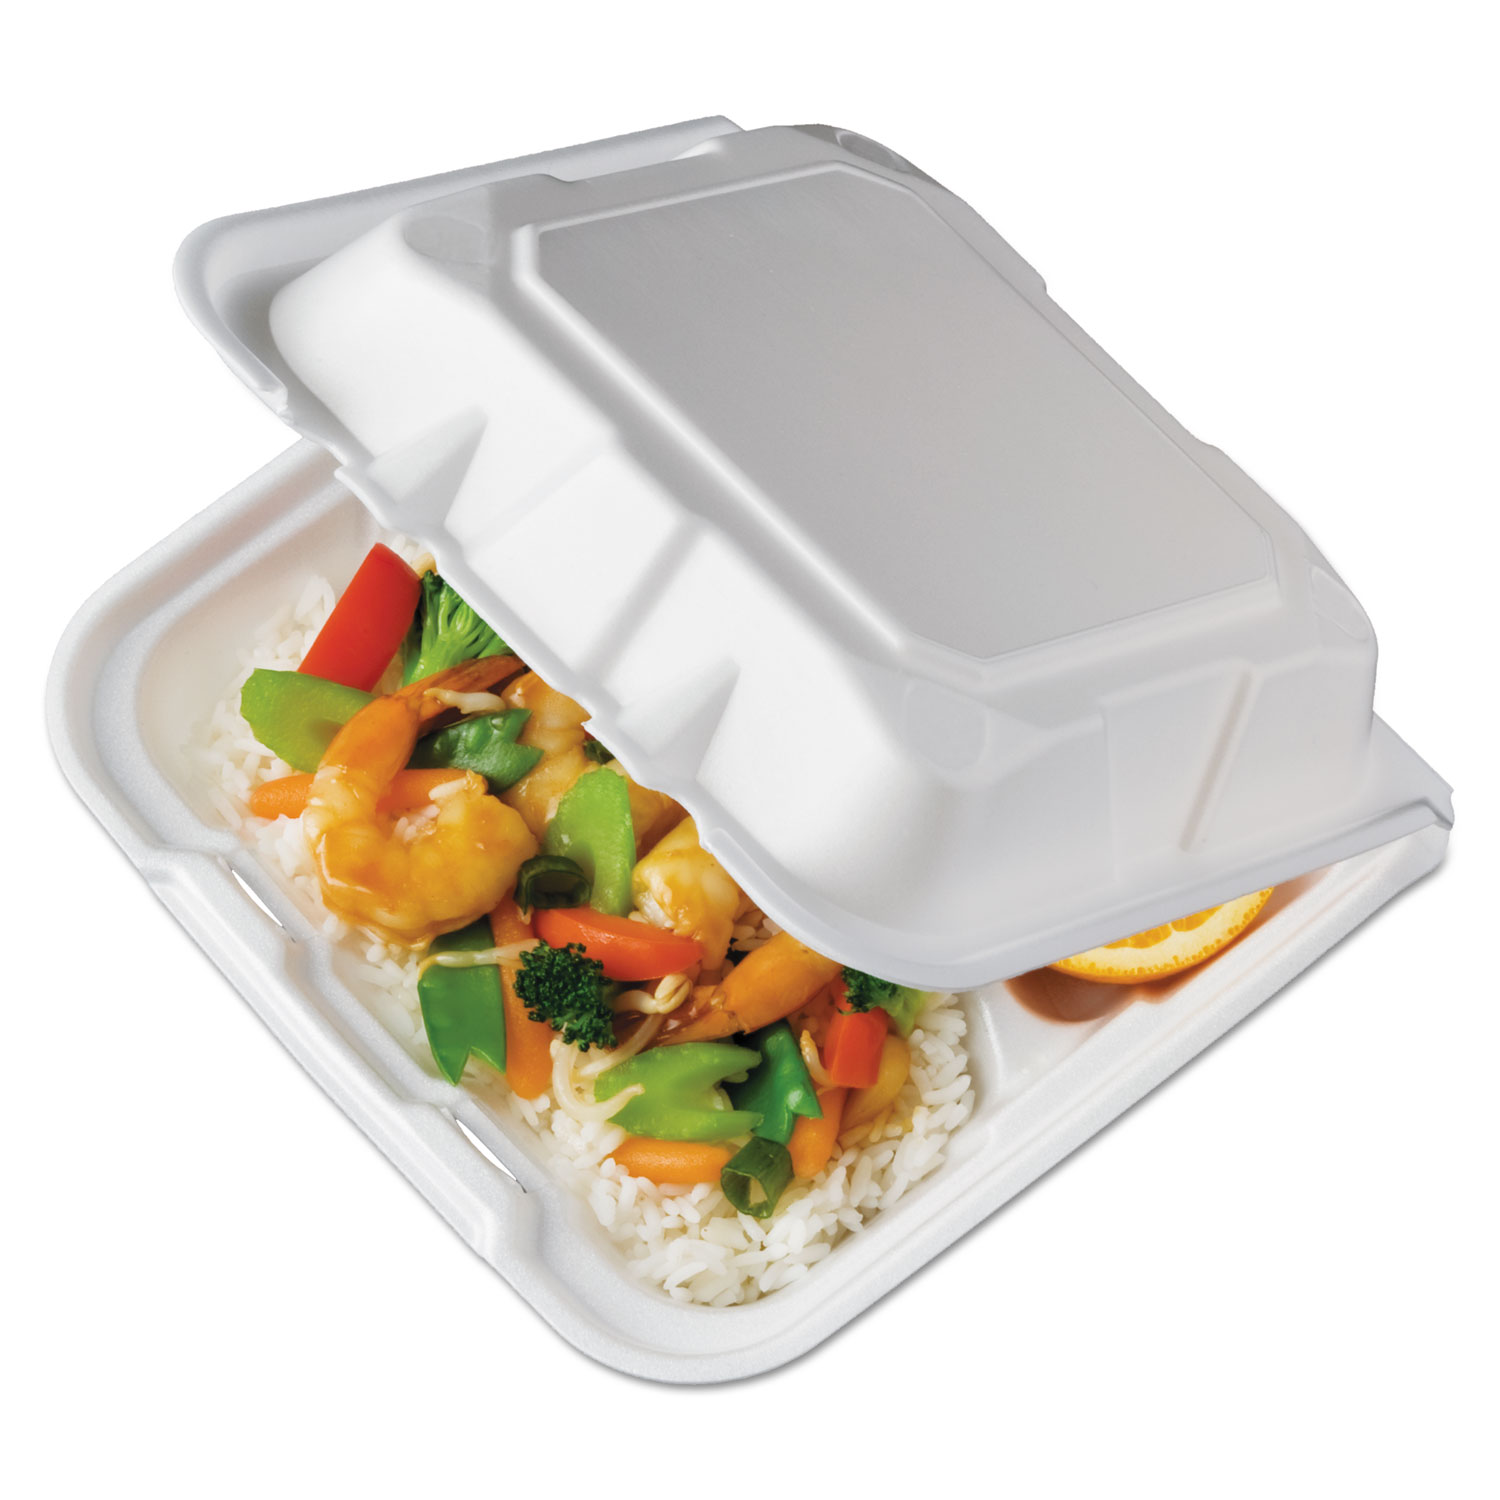  Pactiv YTD188030000 Foam Hinged Lid Containers, White, 8.44 x 8.13 x 3, 3-Compartment, 150/Carton (PCTYTD18803) 